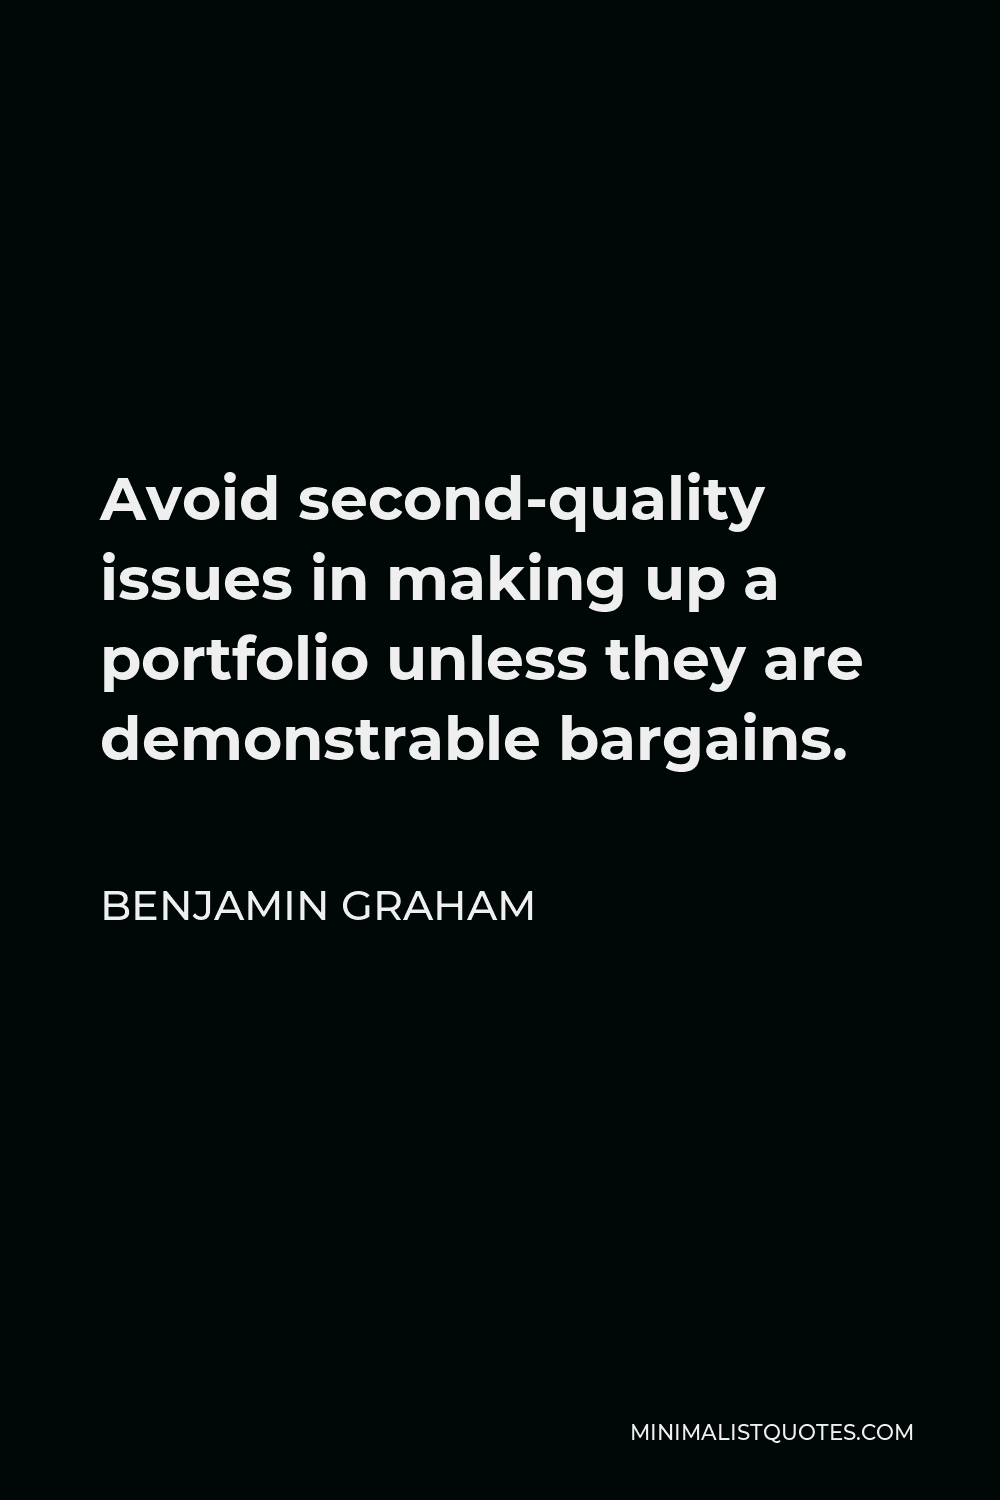 Benjamin Graham Quote - Avoid second-quality issues in making up a portfolio unless they are demonstrable bargains.